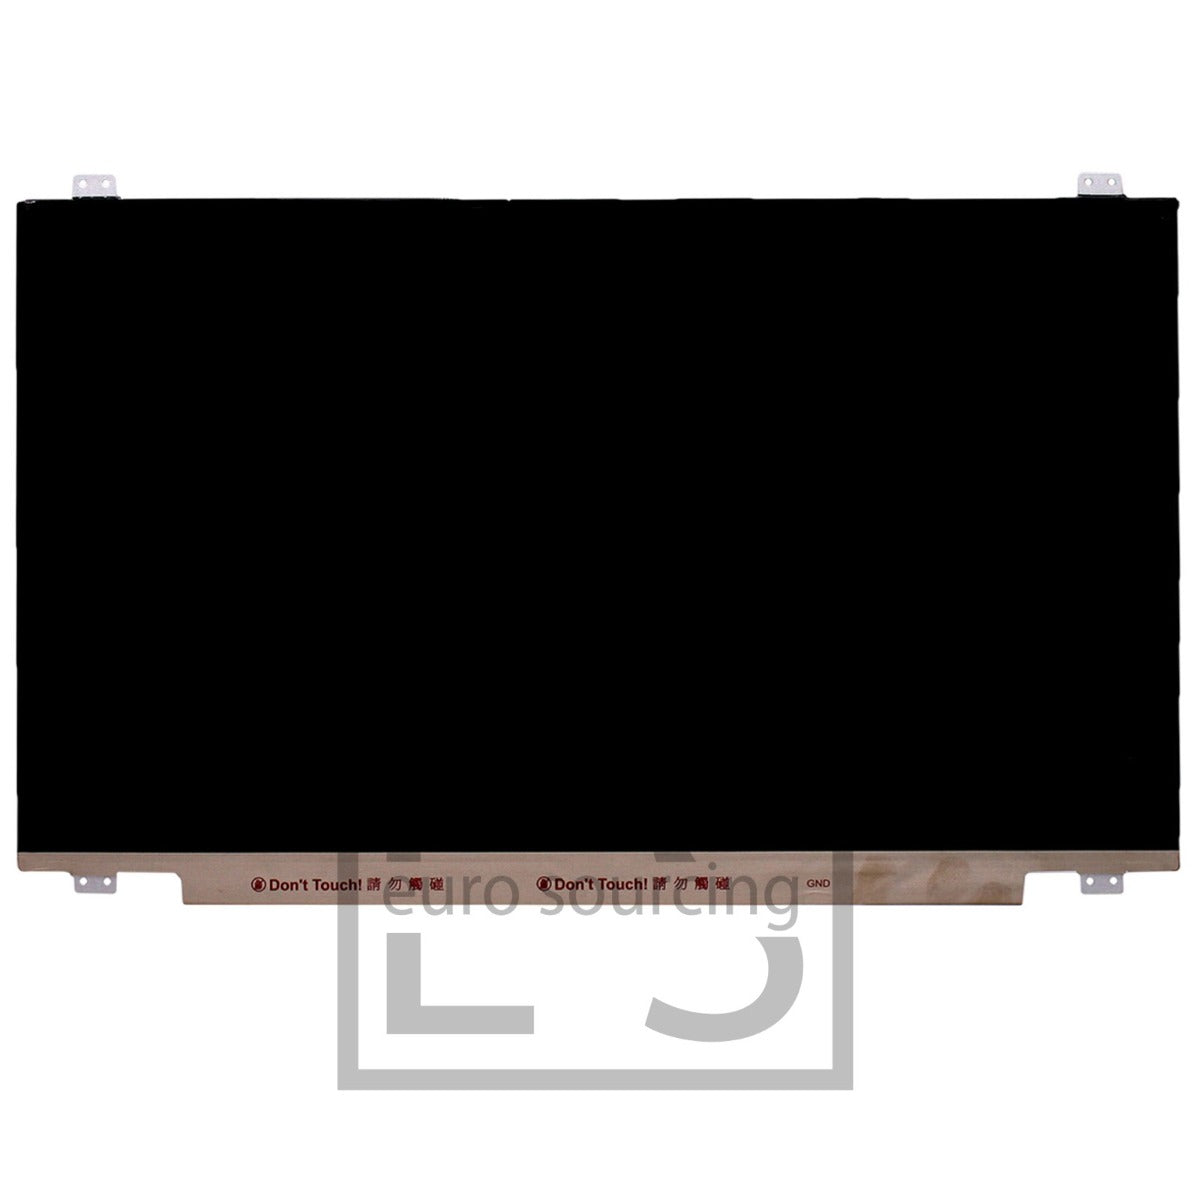 Replacement For B173RTN02.1 17.3" LED SLIM 30 PIN EDP WXGA++ Matte Screen Display Panel Compatible With B173RTN02.1 H/W:8A